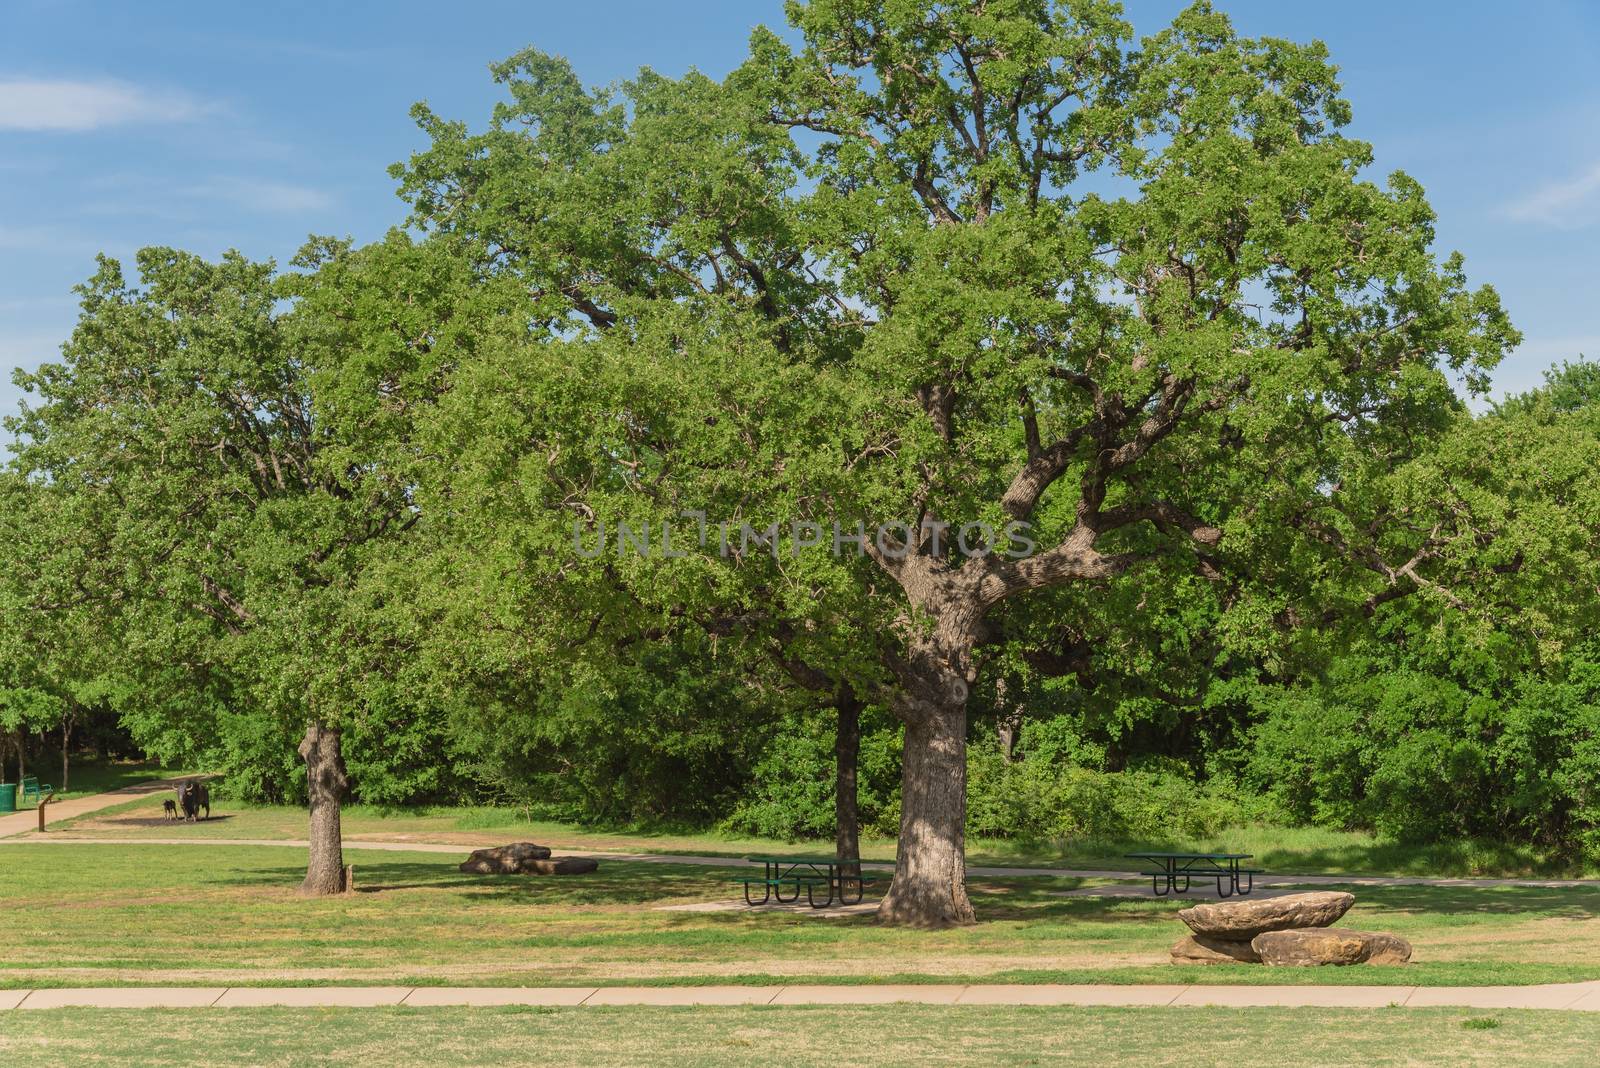 Picnic tables at public nature park in Texas, America by trongnguyen